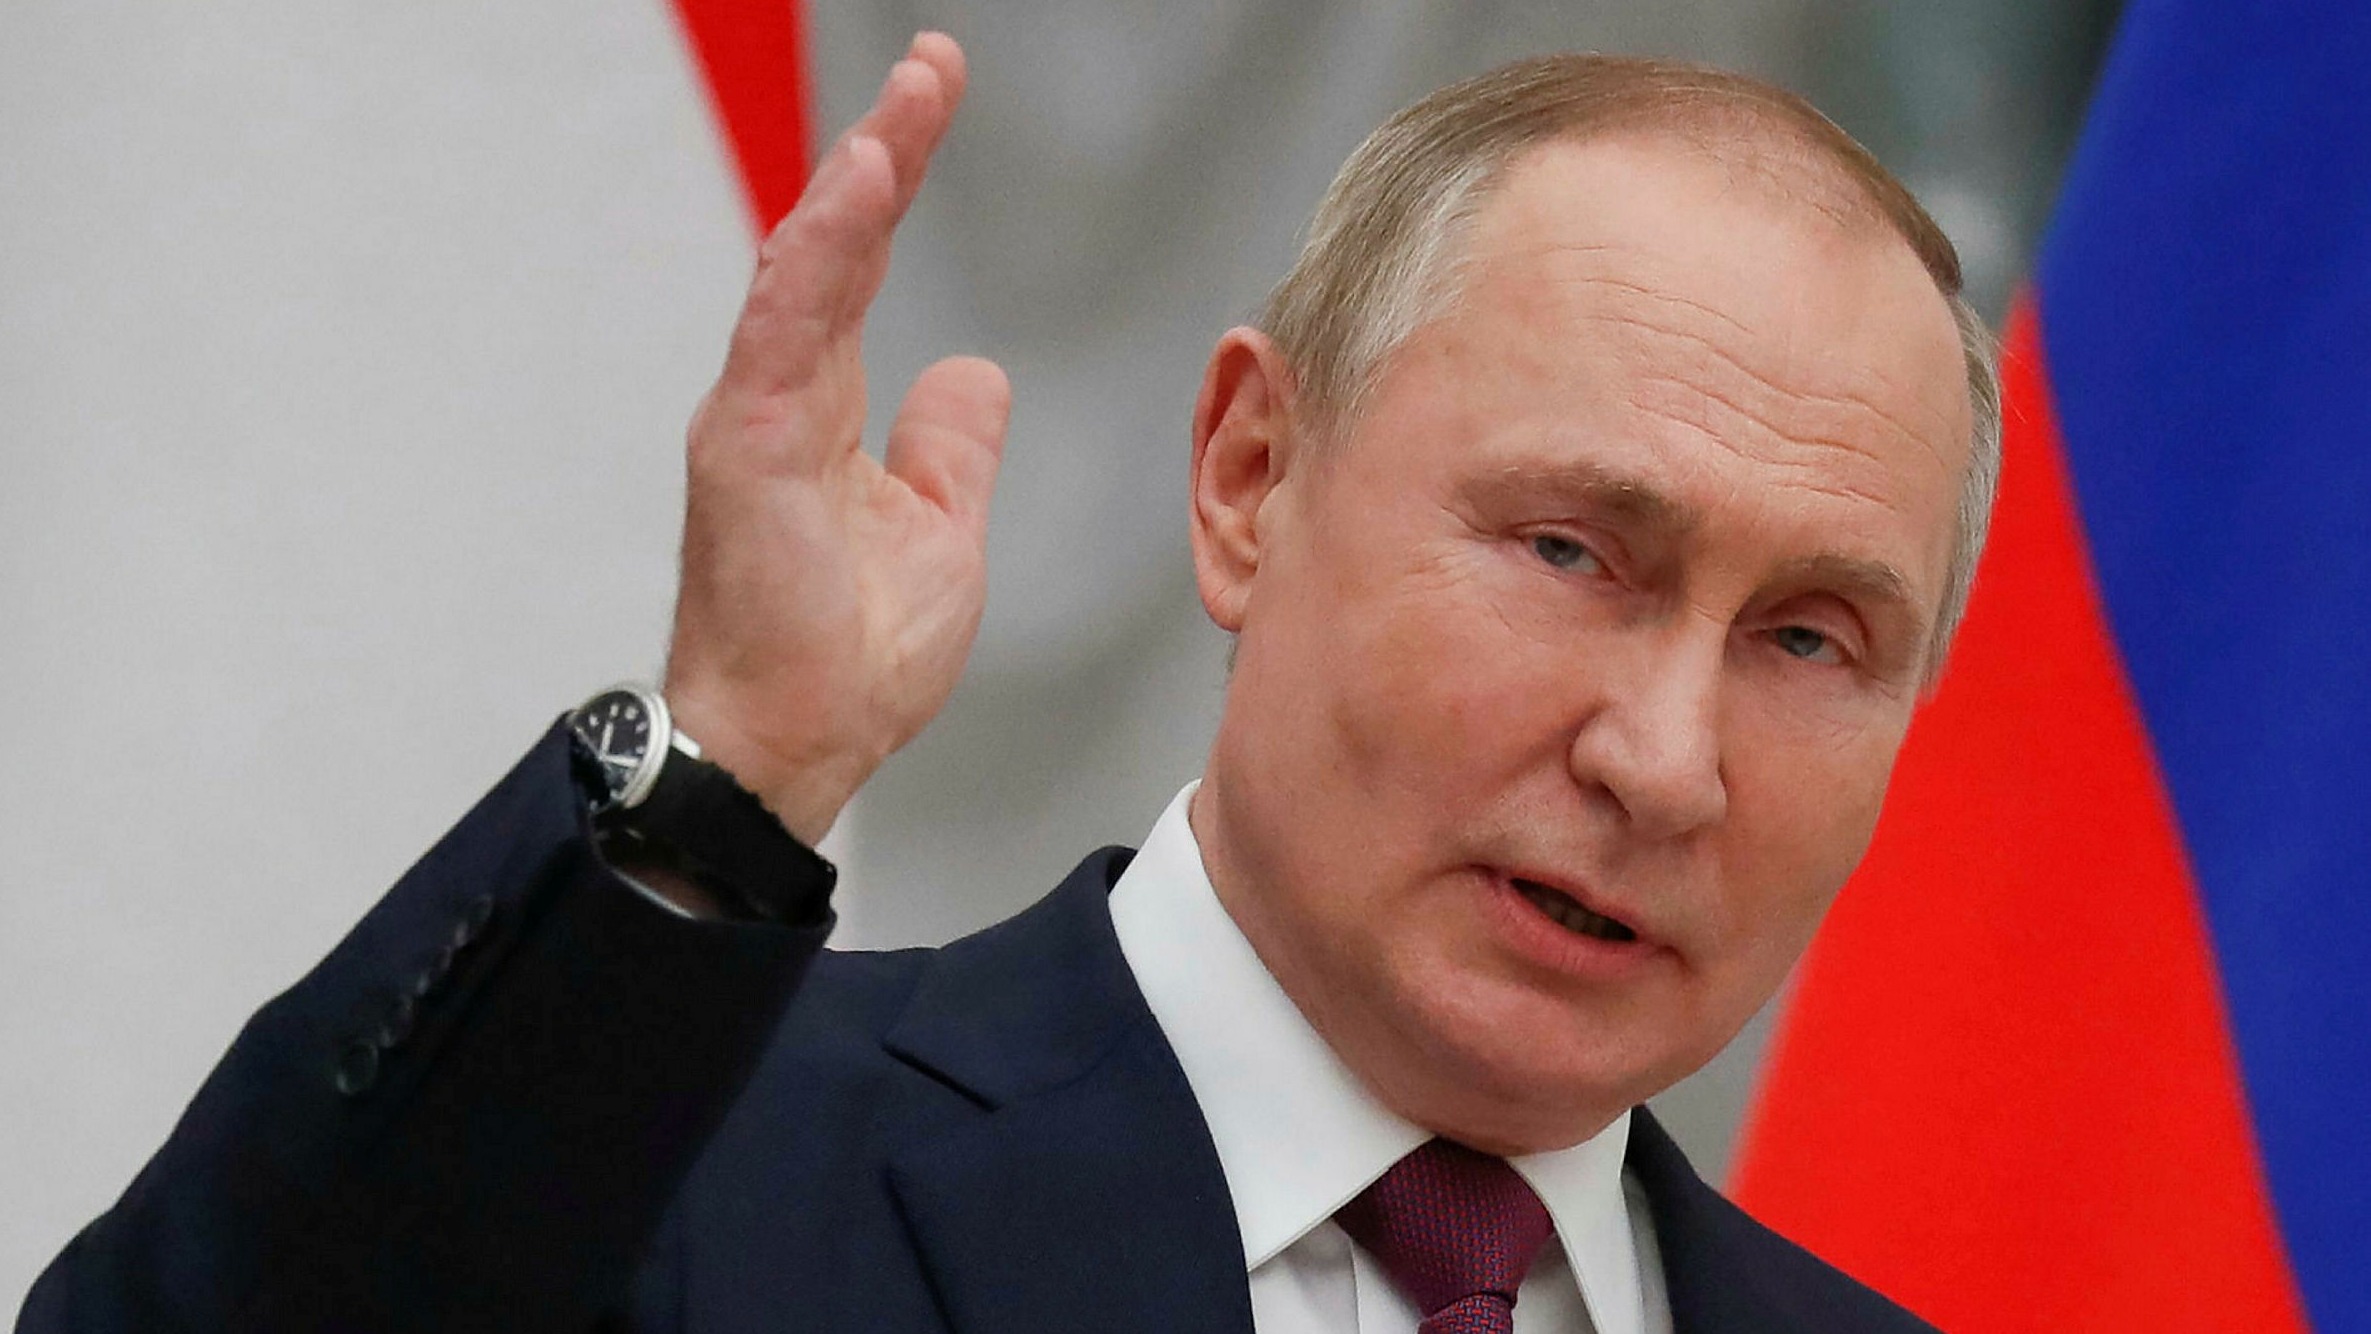 vladimir putin says us is trying to drag russia into war | financial times